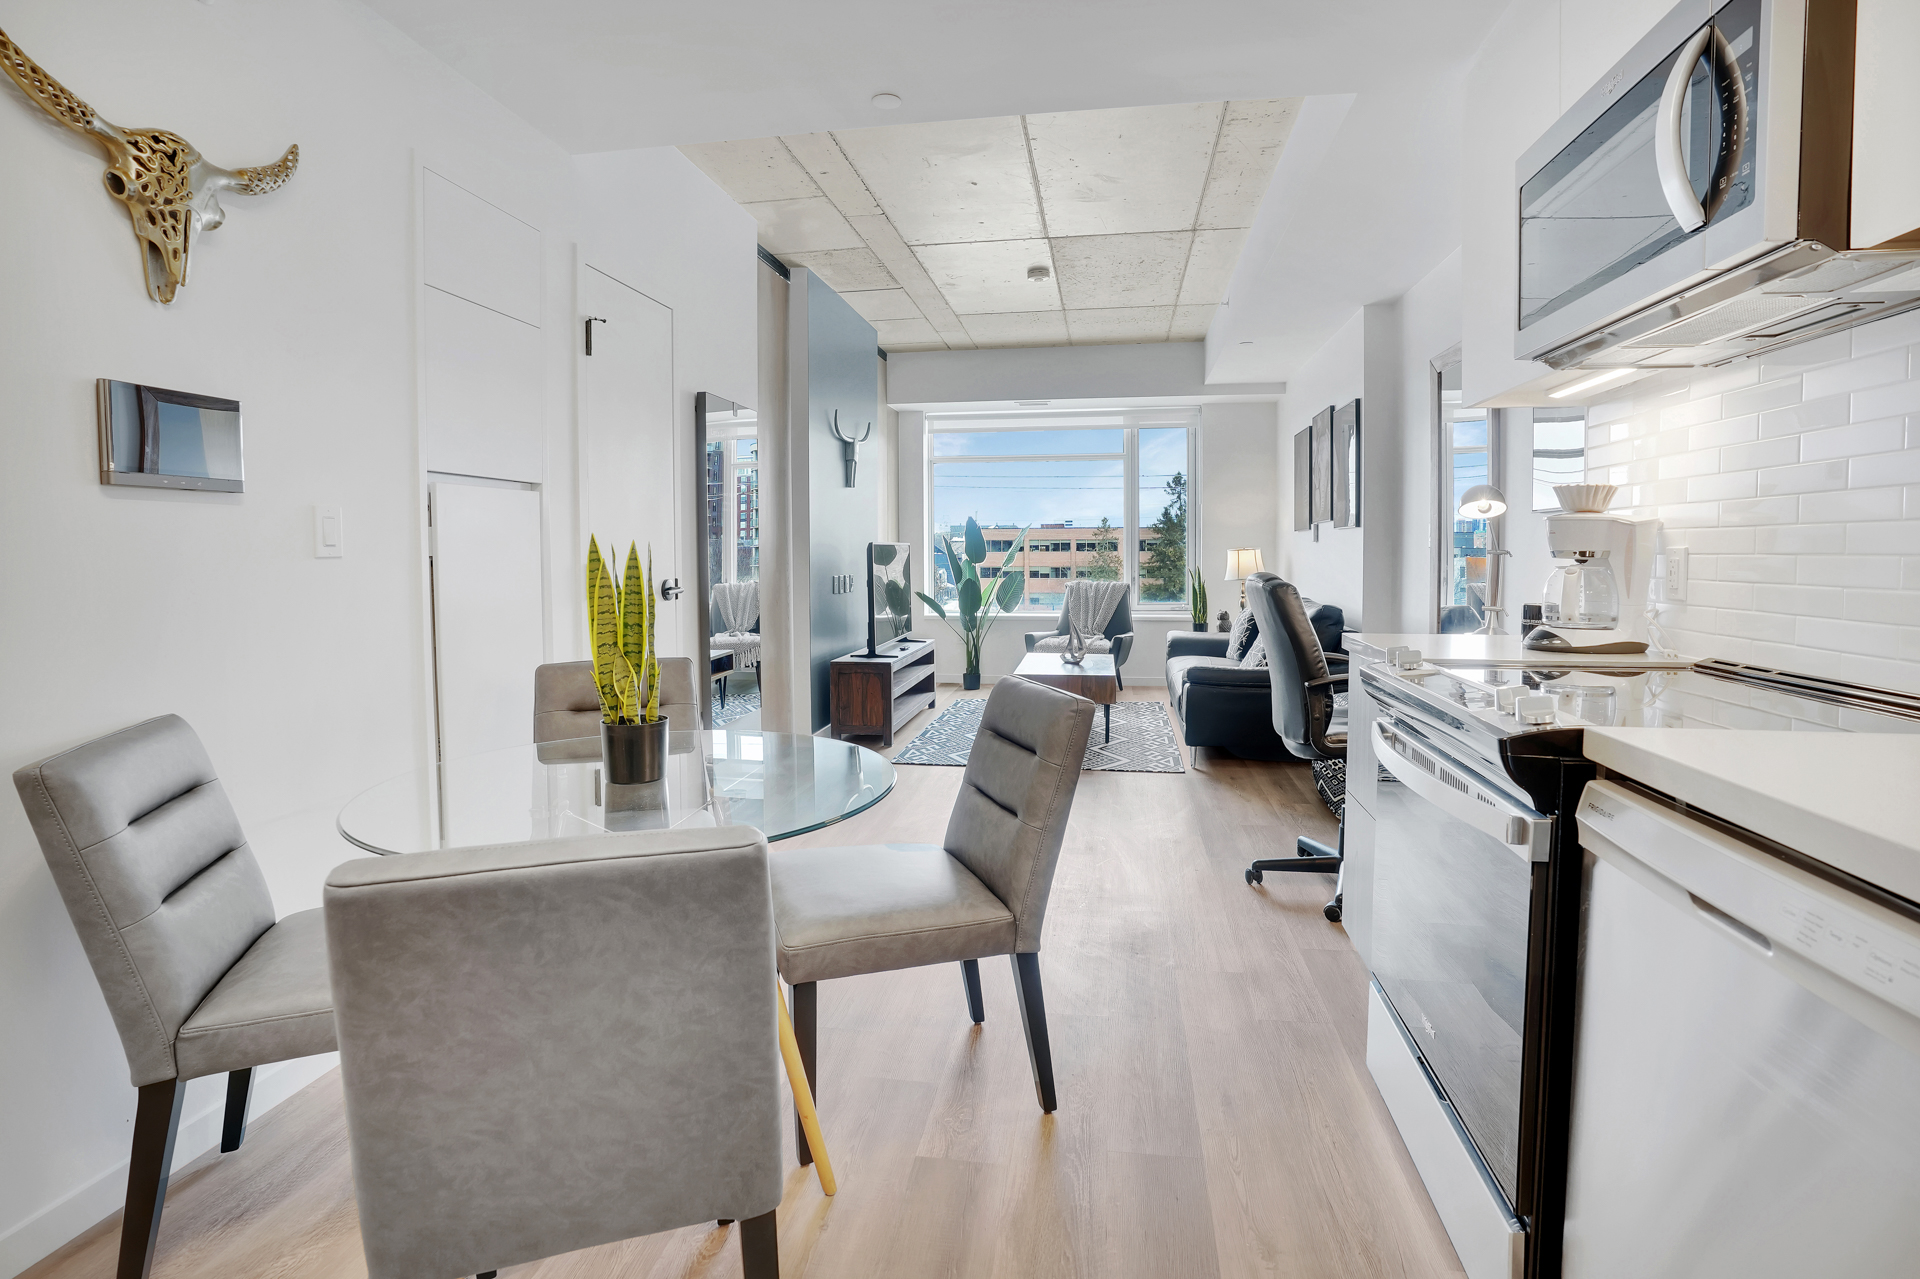 Corporate Stays expands portfolio with Canvas Lofts in Ottawa